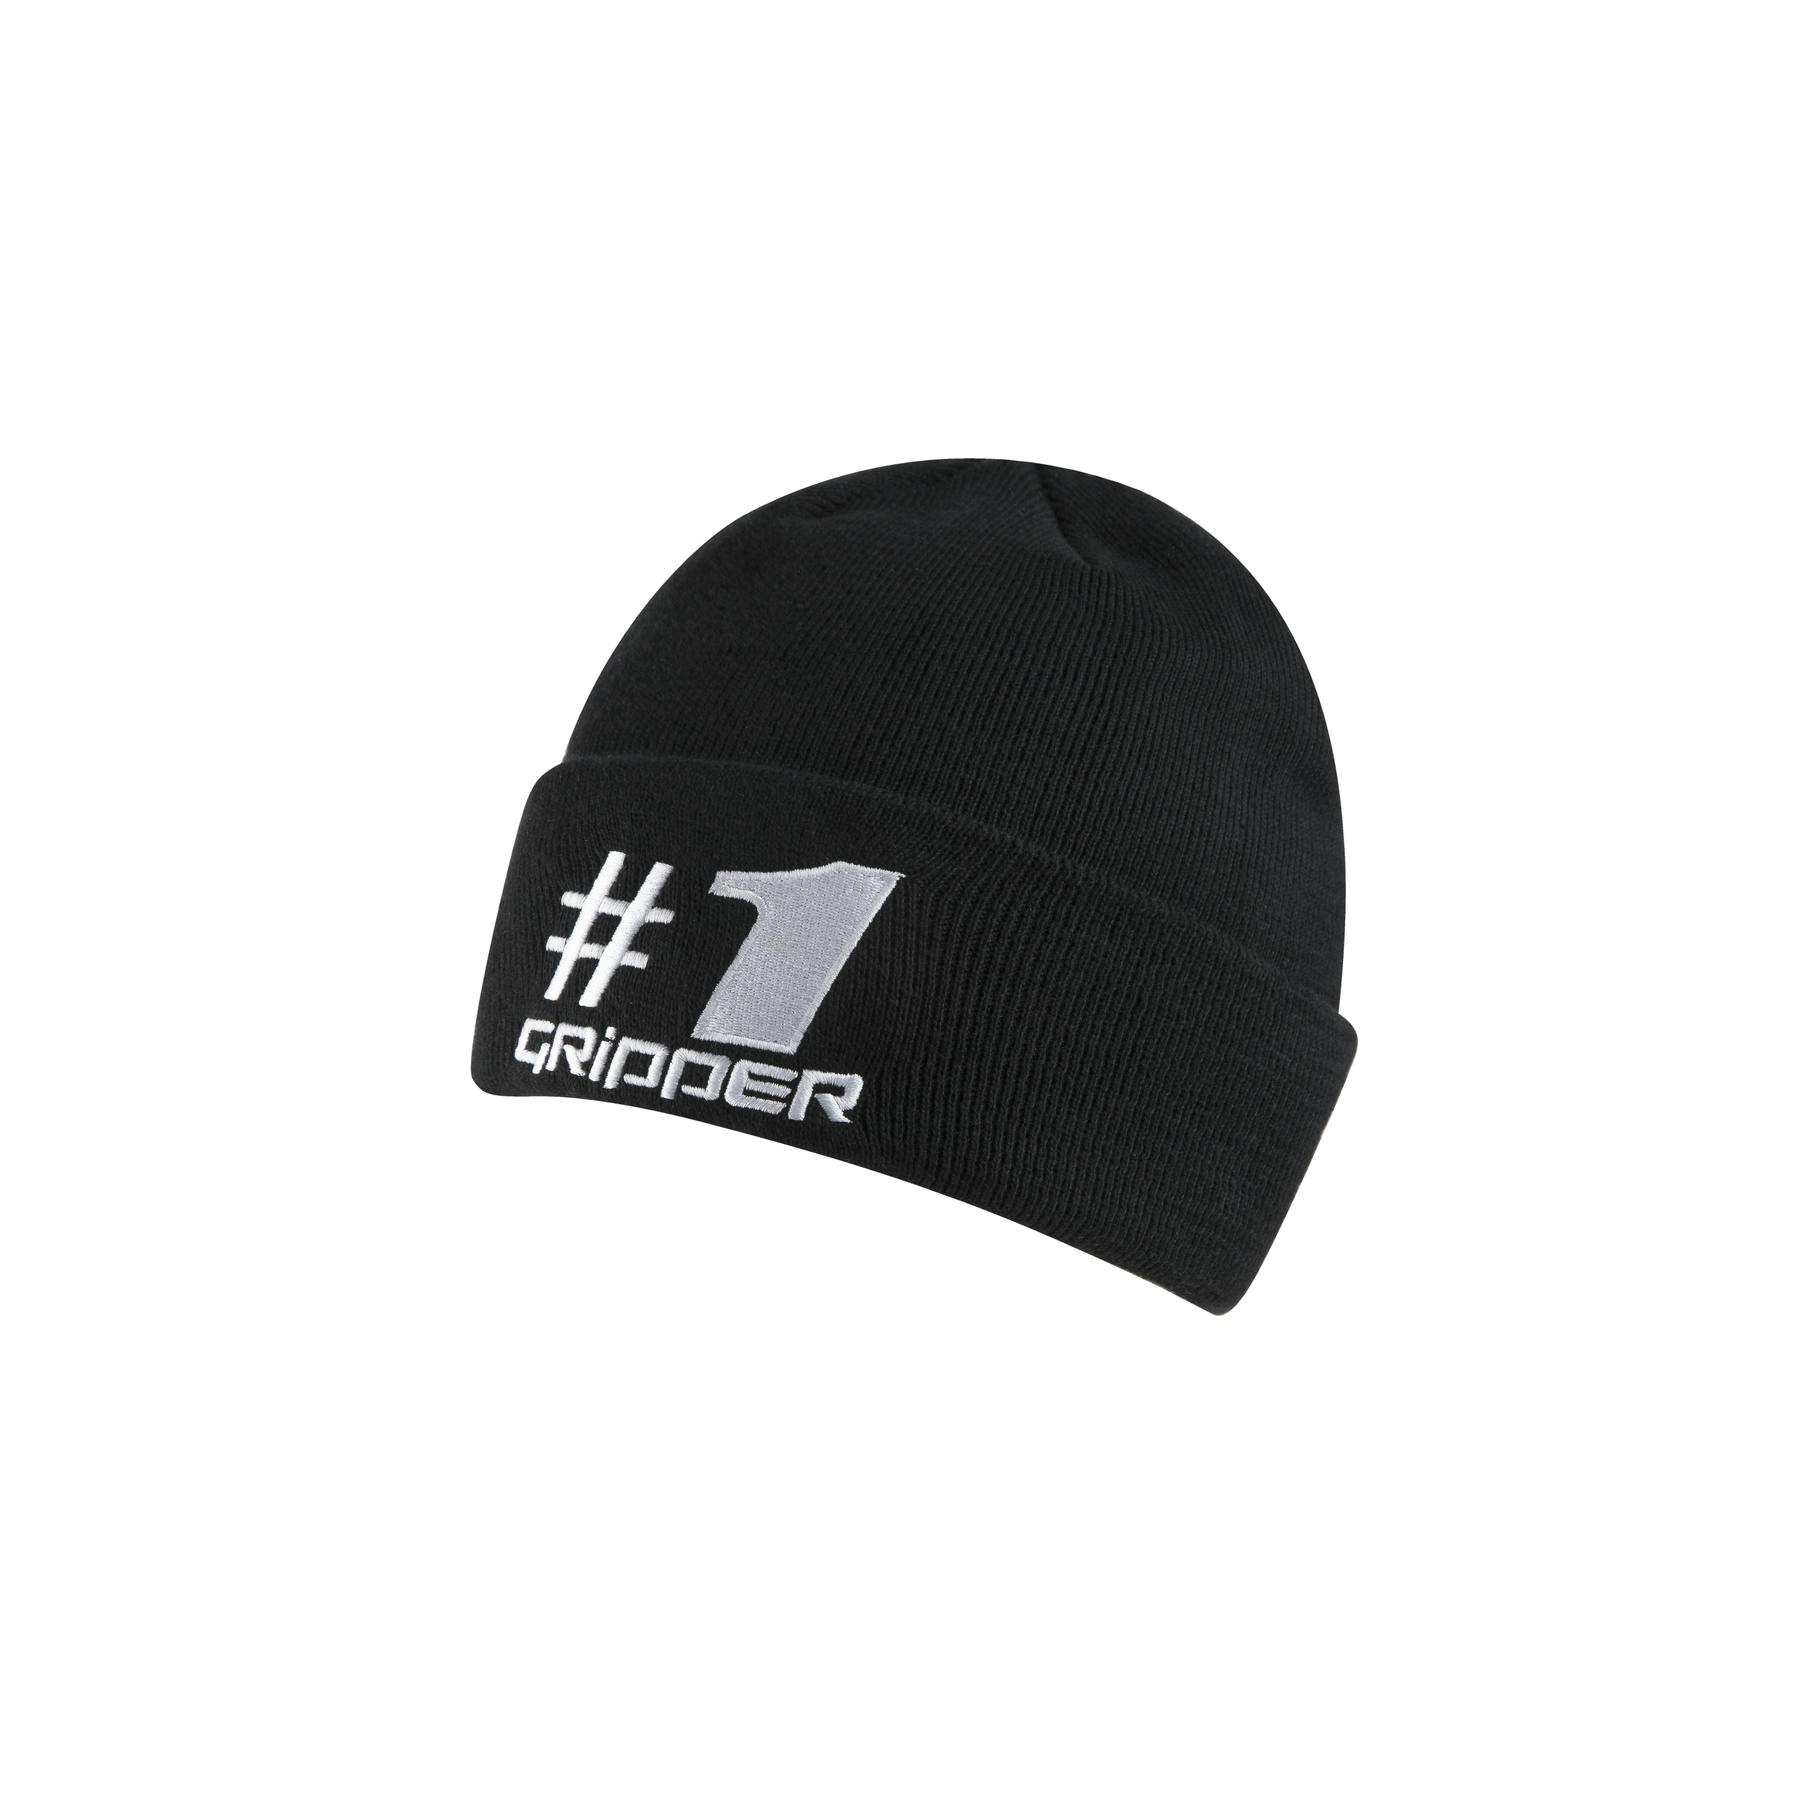 Stay Warm & Comfortable with the Original ONEGRIPPER Beanie! - ONEGRIPPER -  Motocross & Enduro Sadelöverdrag